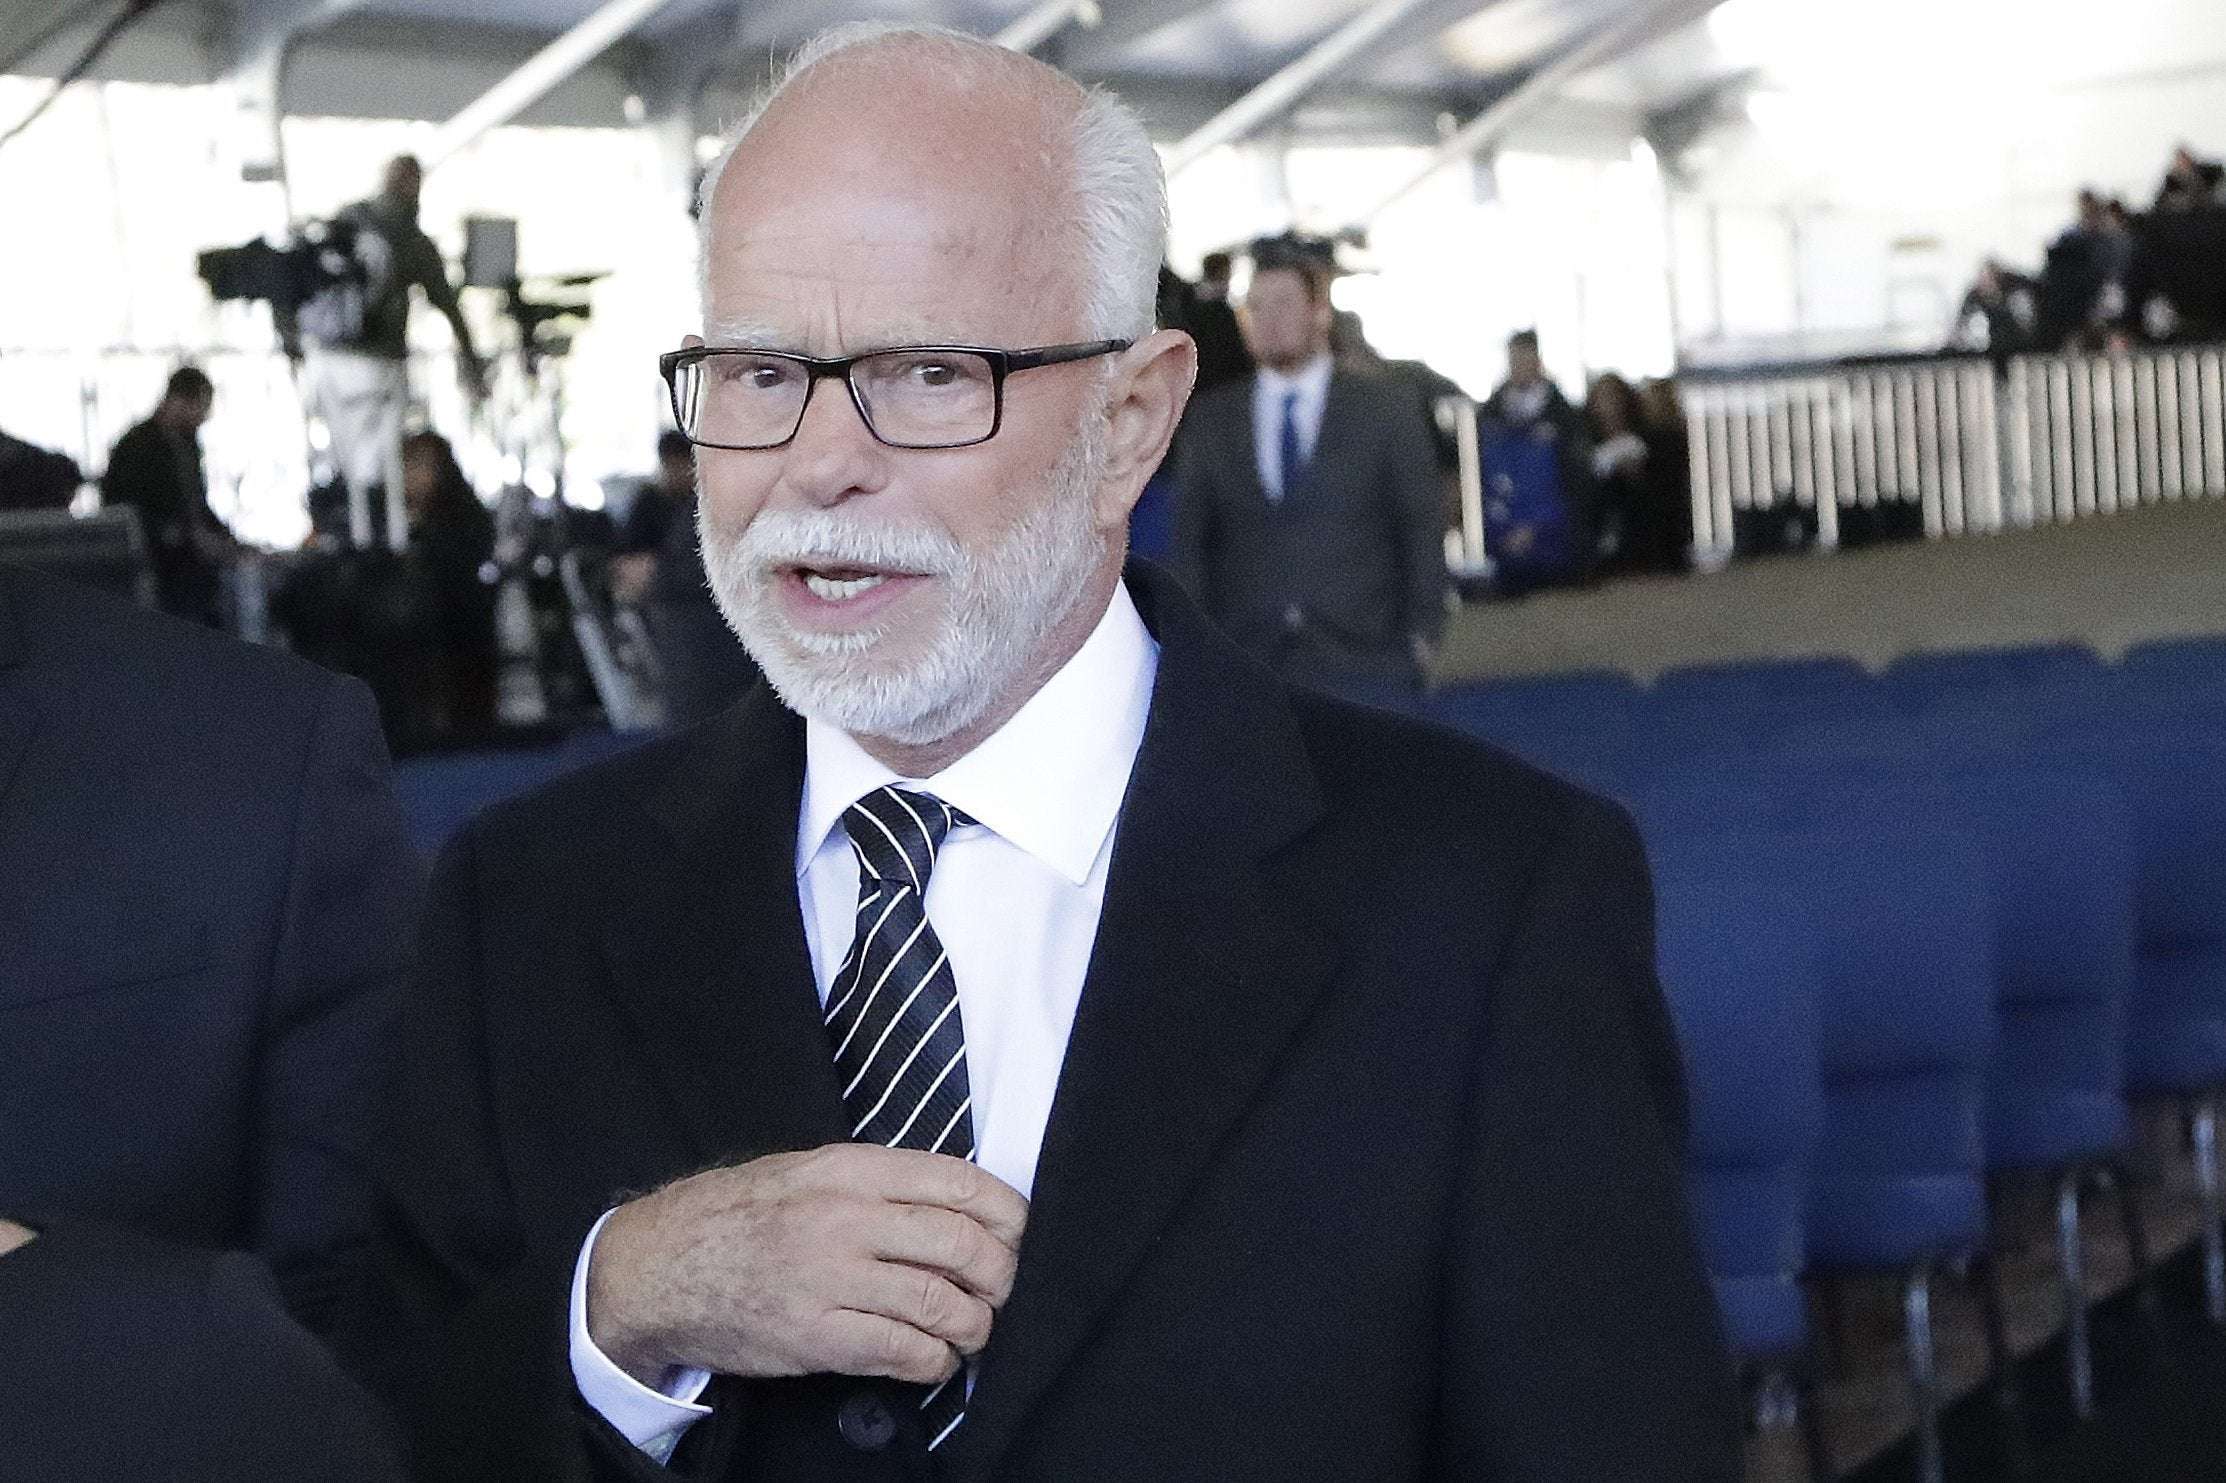 image for Jim Bakker gets PPP loans during legal fight on fraud claims